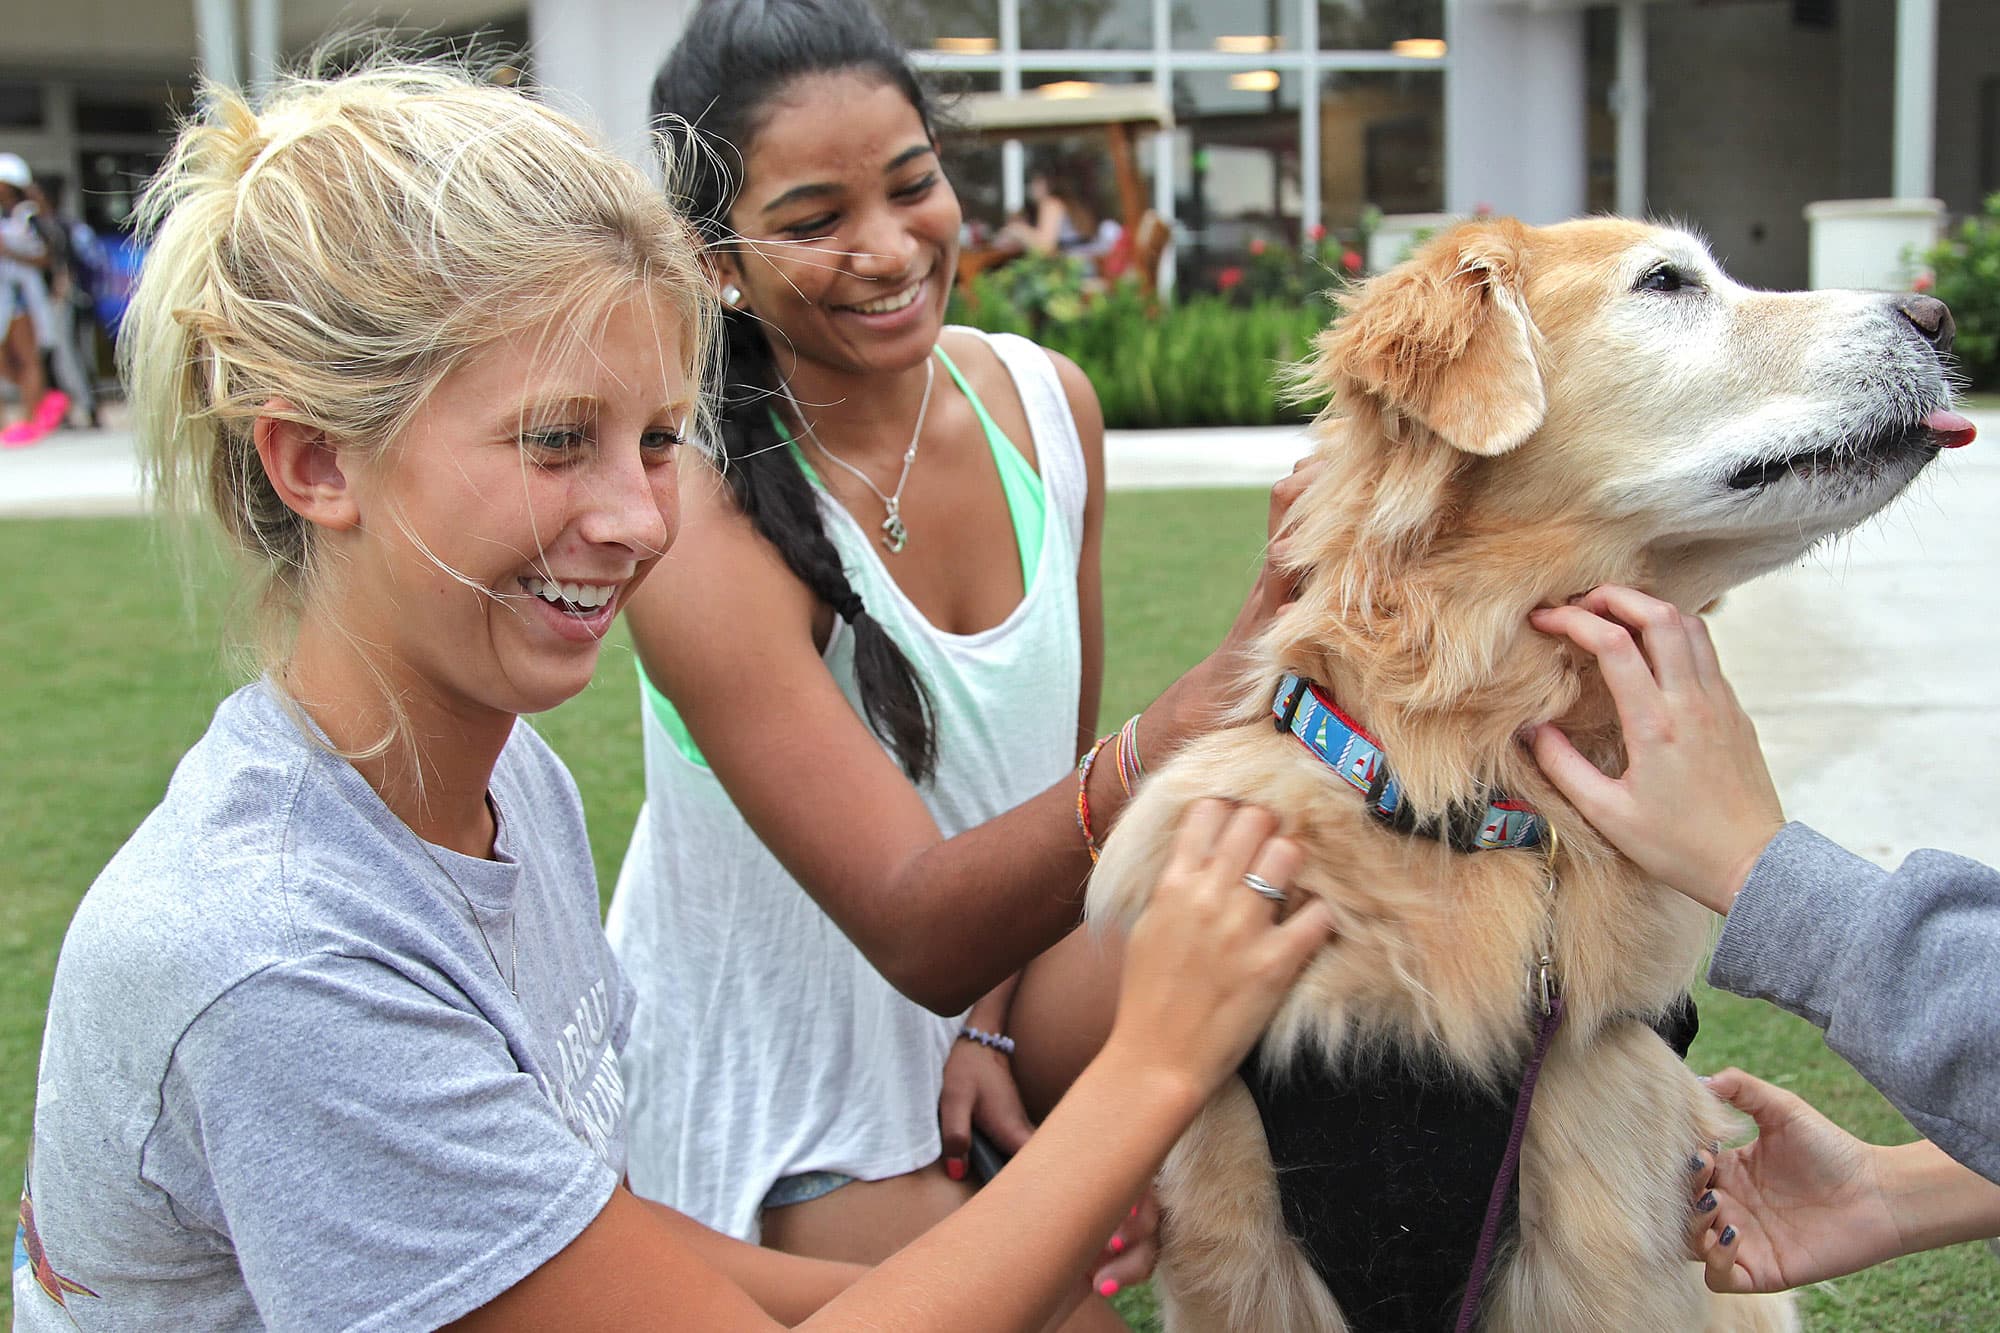 Here are the colleges that will allow you to bring furry friends to school